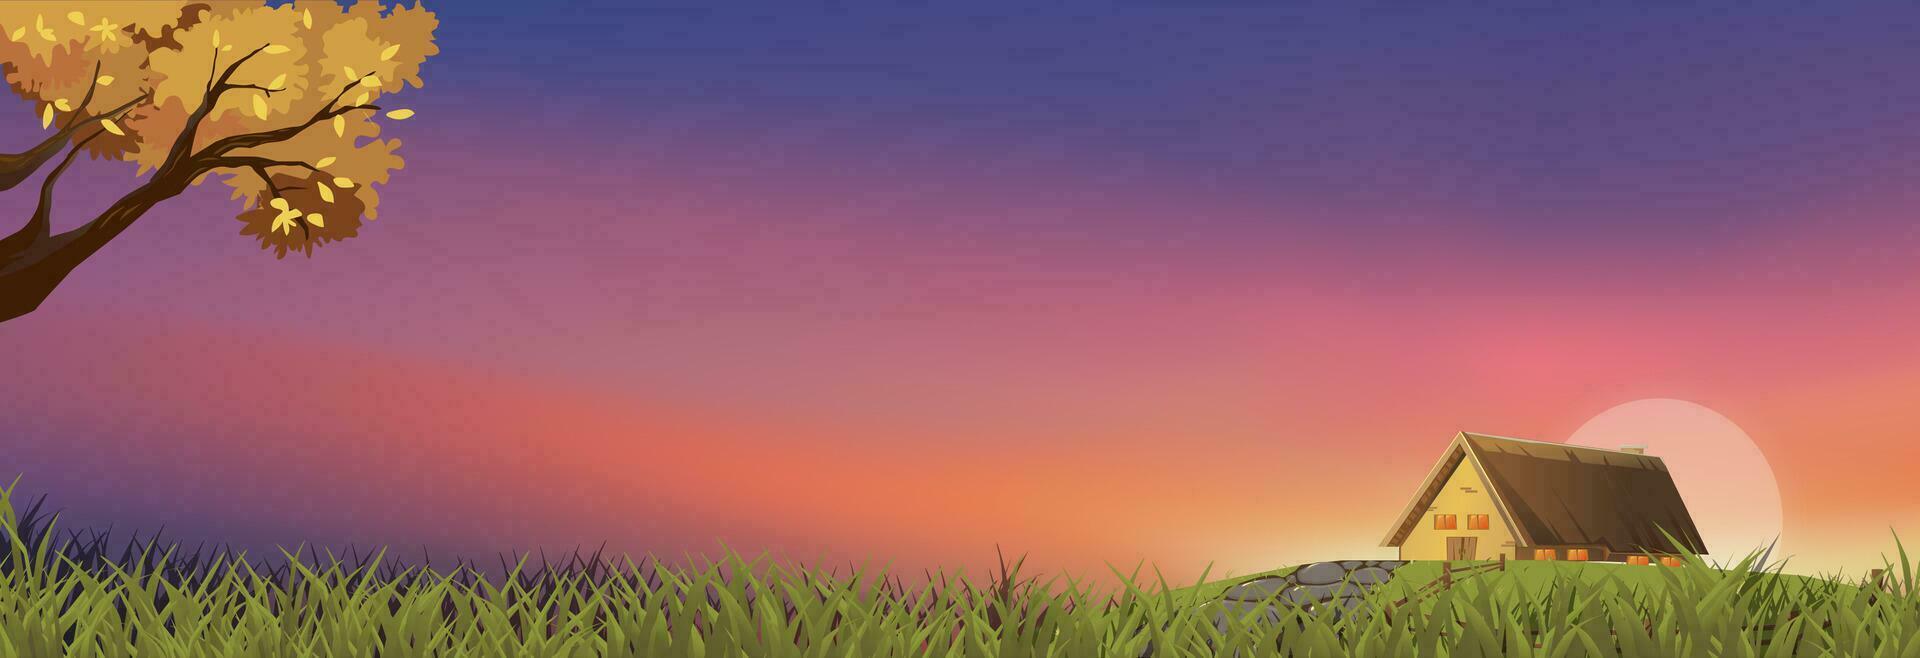 Spring landscape sunset sky background,Vector cartoon Village   Morning sunrise over farm house,grass field and tree,Horizon Nature rural scene countryside in Summer vector